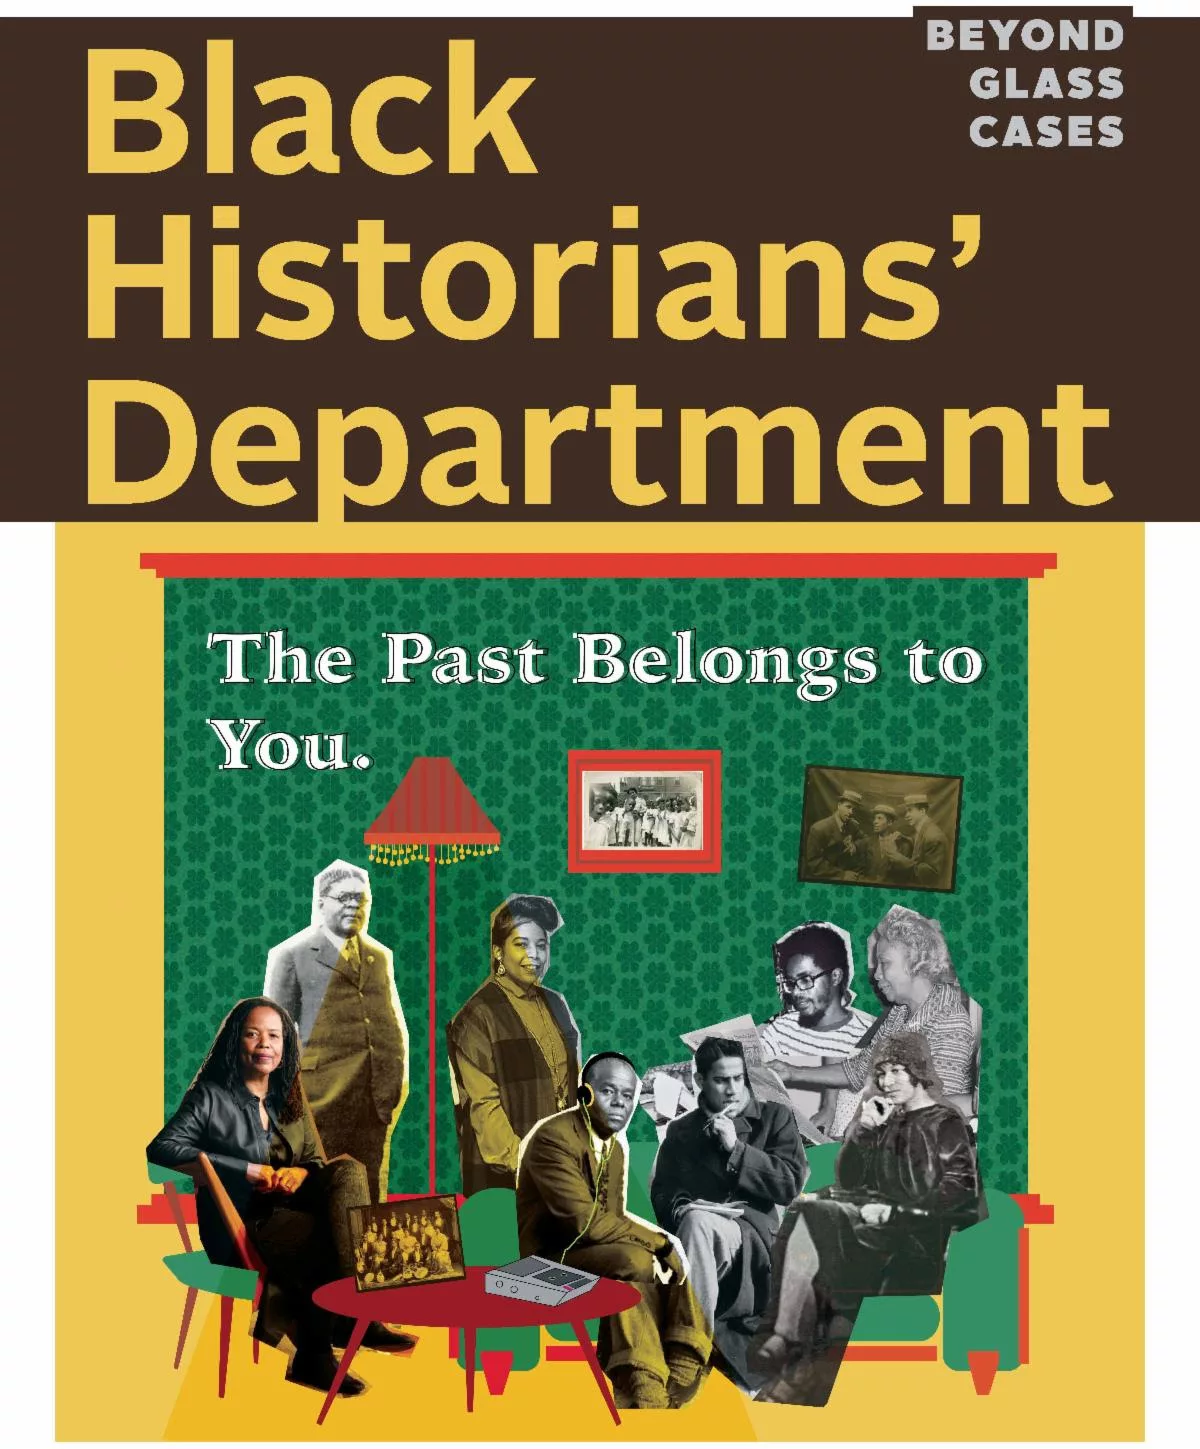 The Black Historians' Department: The Past Belongs to You Exhibition Opening